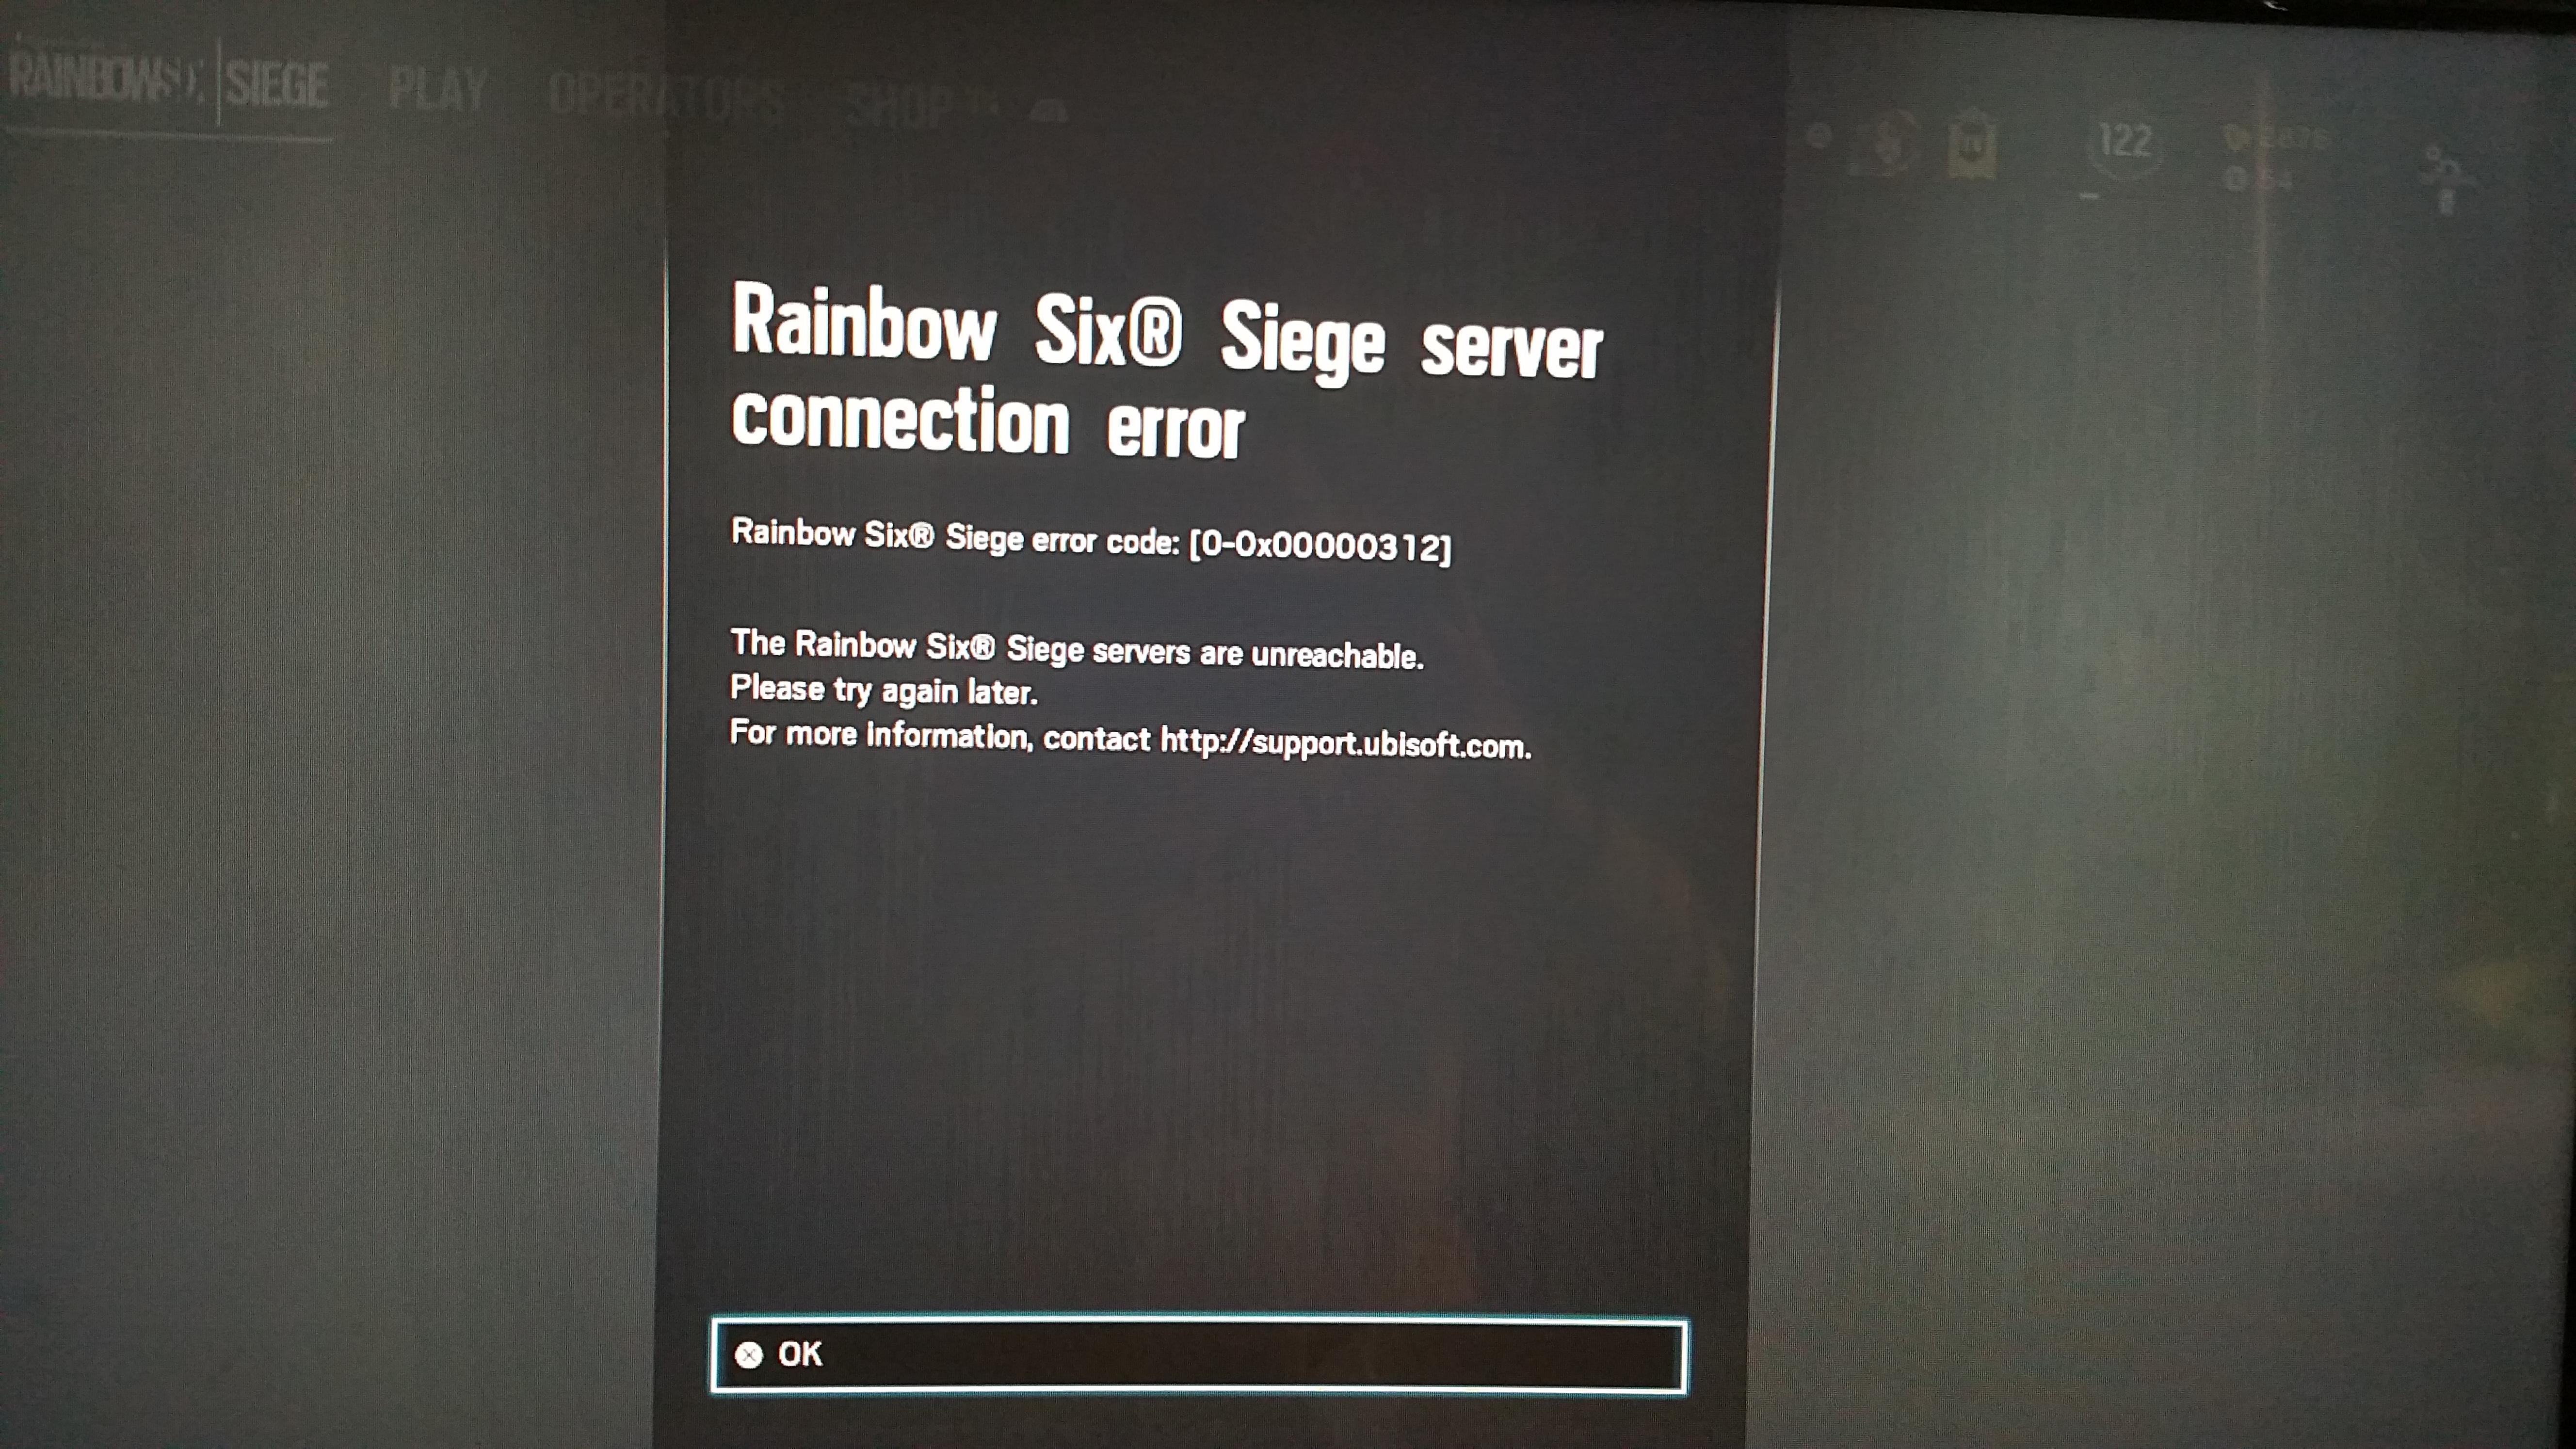 r6 servers are down